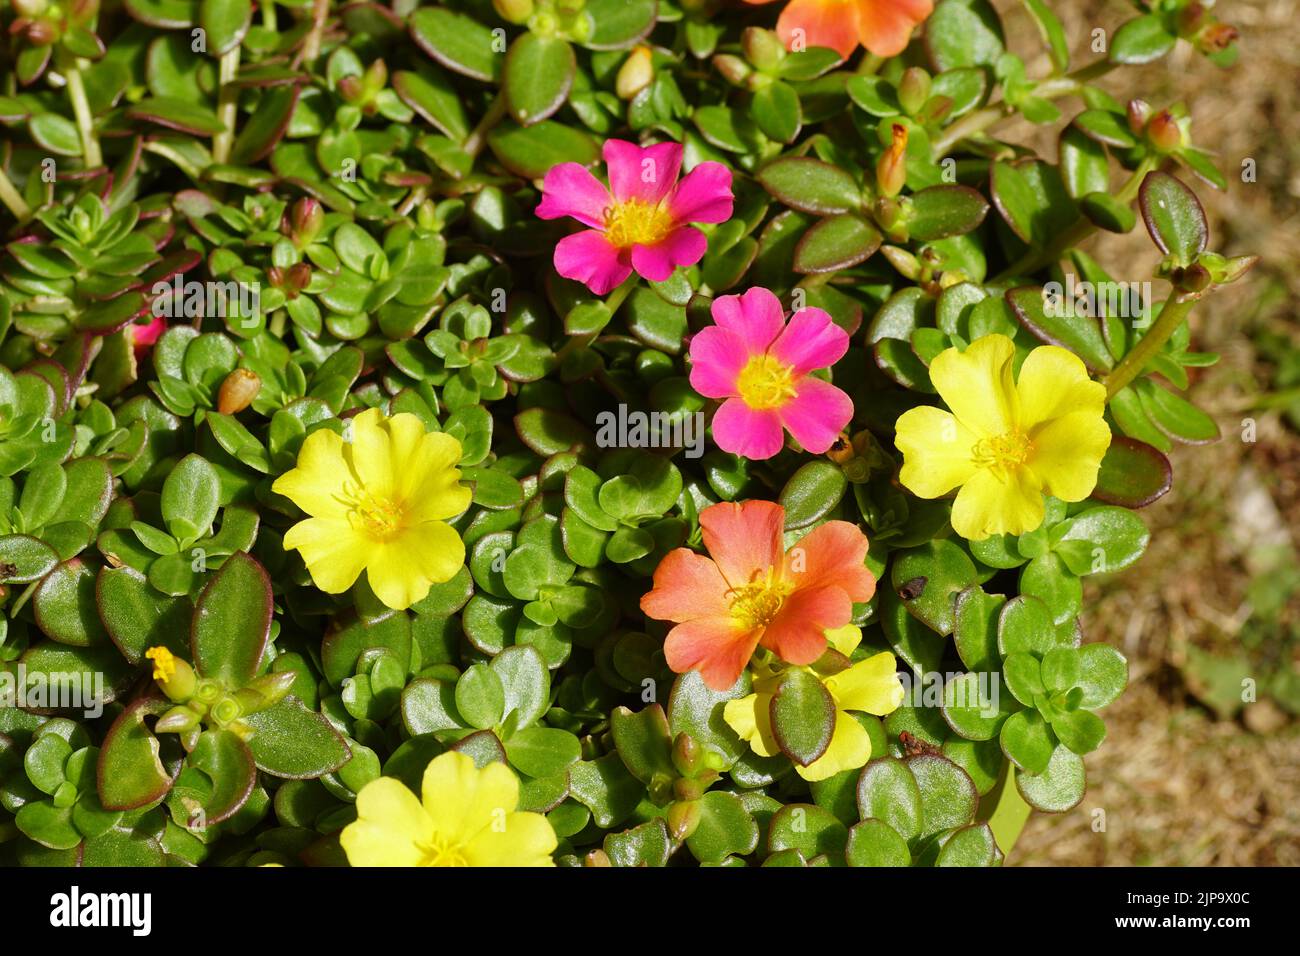 Close up flowers of Portulak 'Carnaval', Moss rose (Portulaca grandiflora Carnaval), family Portulacaceae. A semi-succulent plant. Summer, August, Stock Photo